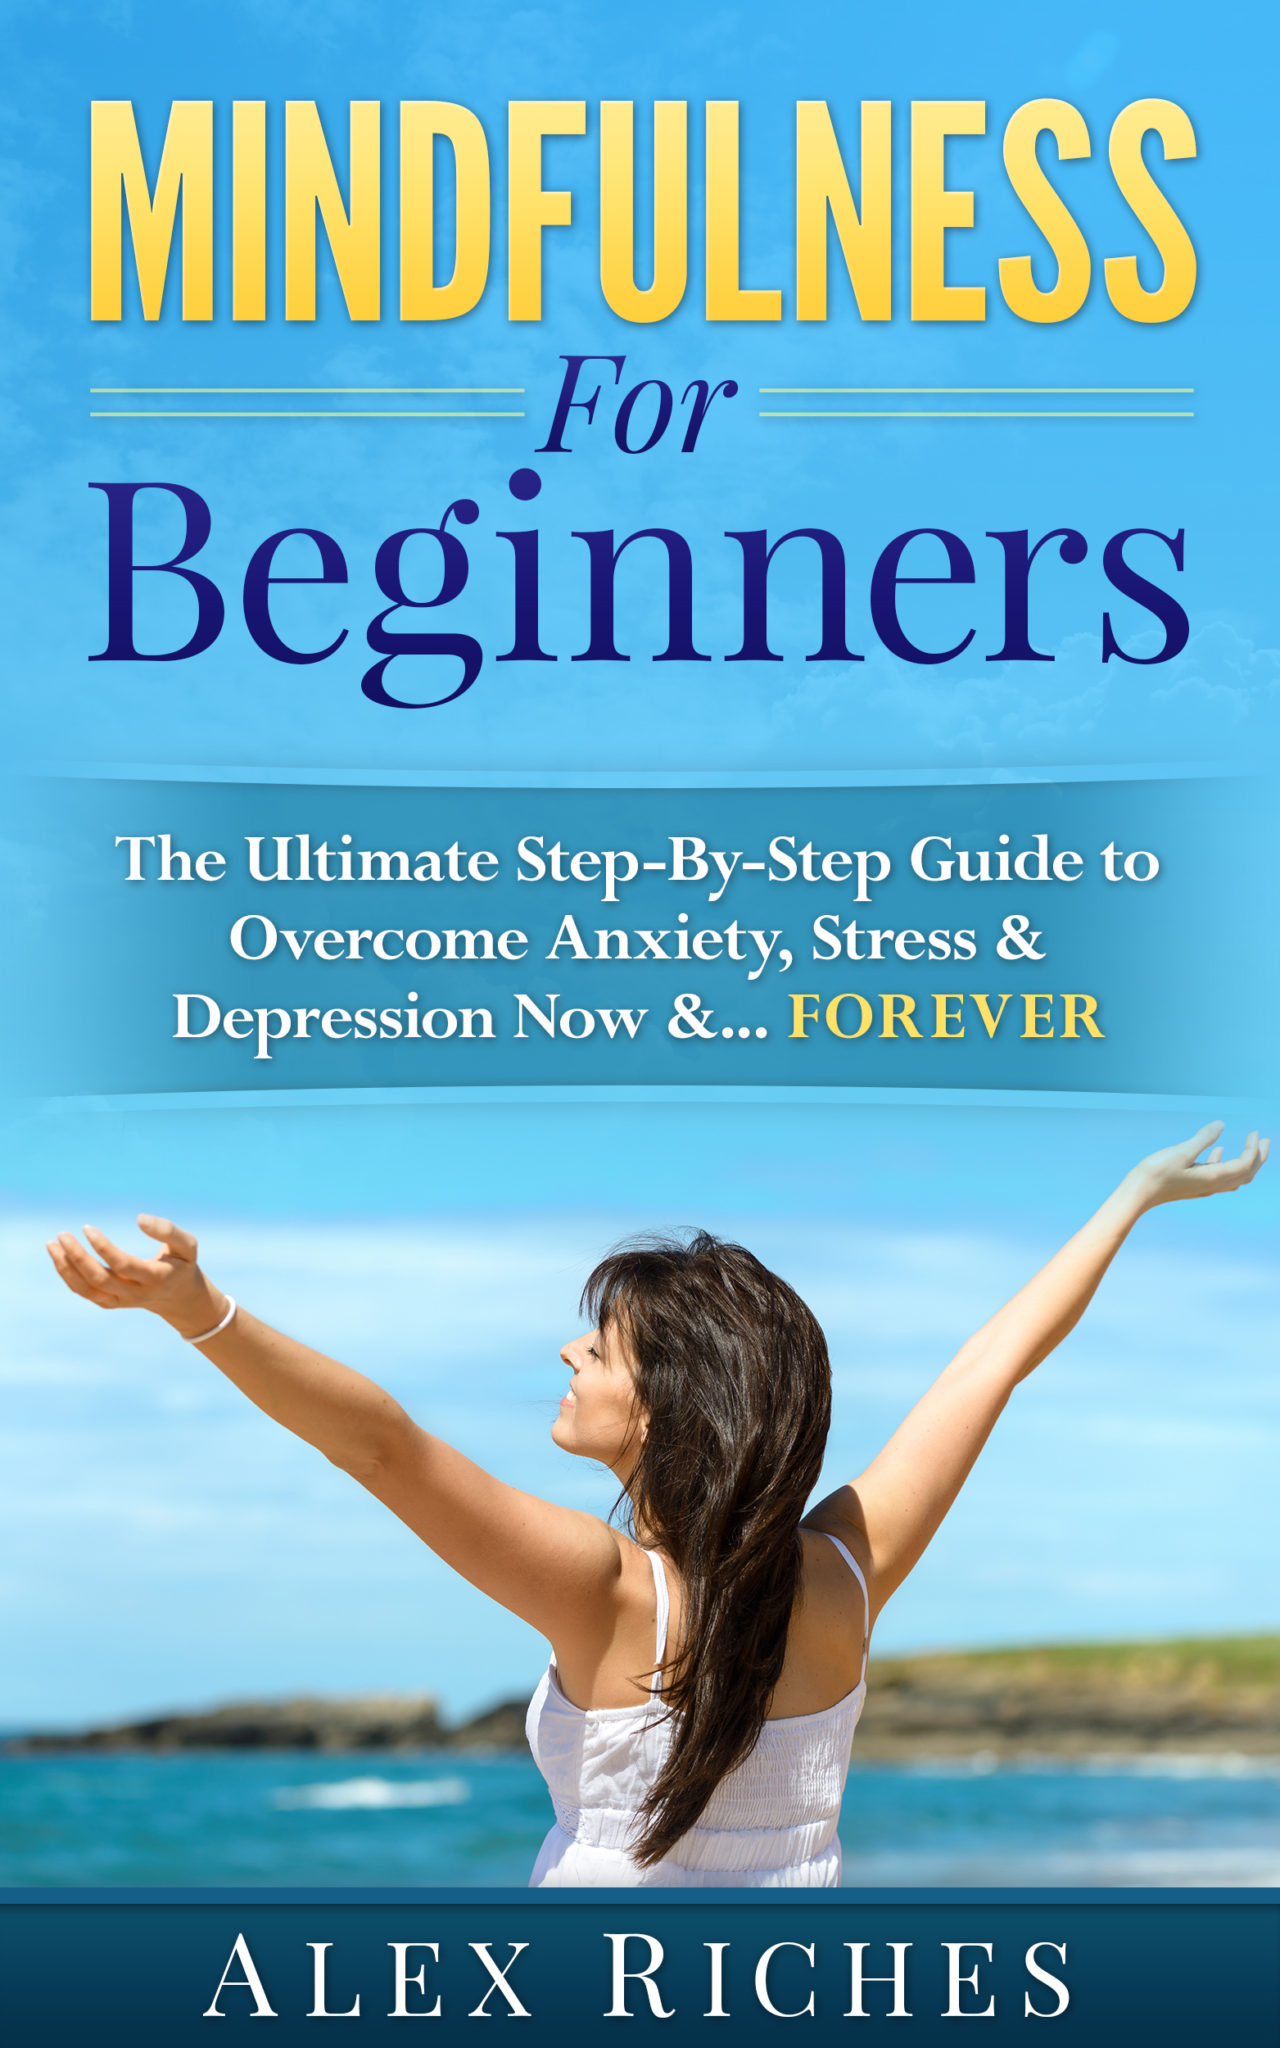 FREE: Mindfulness For Beginners: The Ultimate Step-By-Step Guide to Overcome Anxiety, Stress & Depression Now &…Forever by Alex Riches